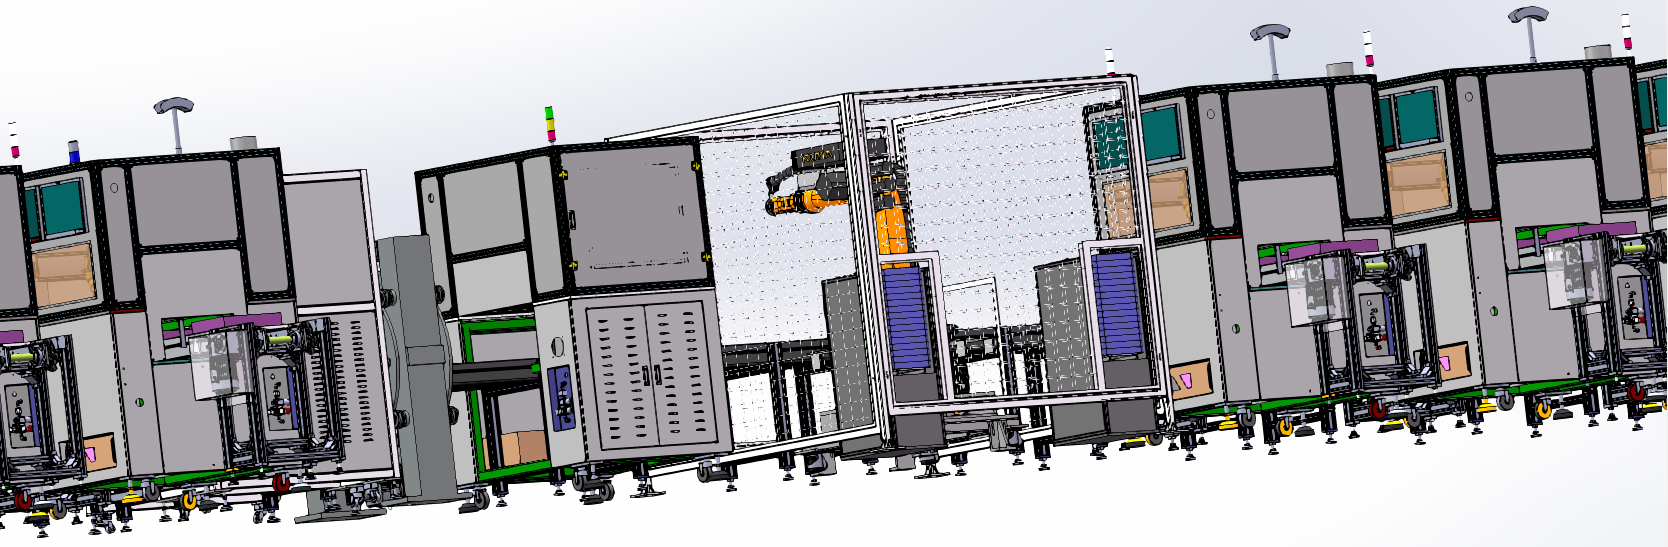 Battery cell welding production and processing line designed by Solidworks